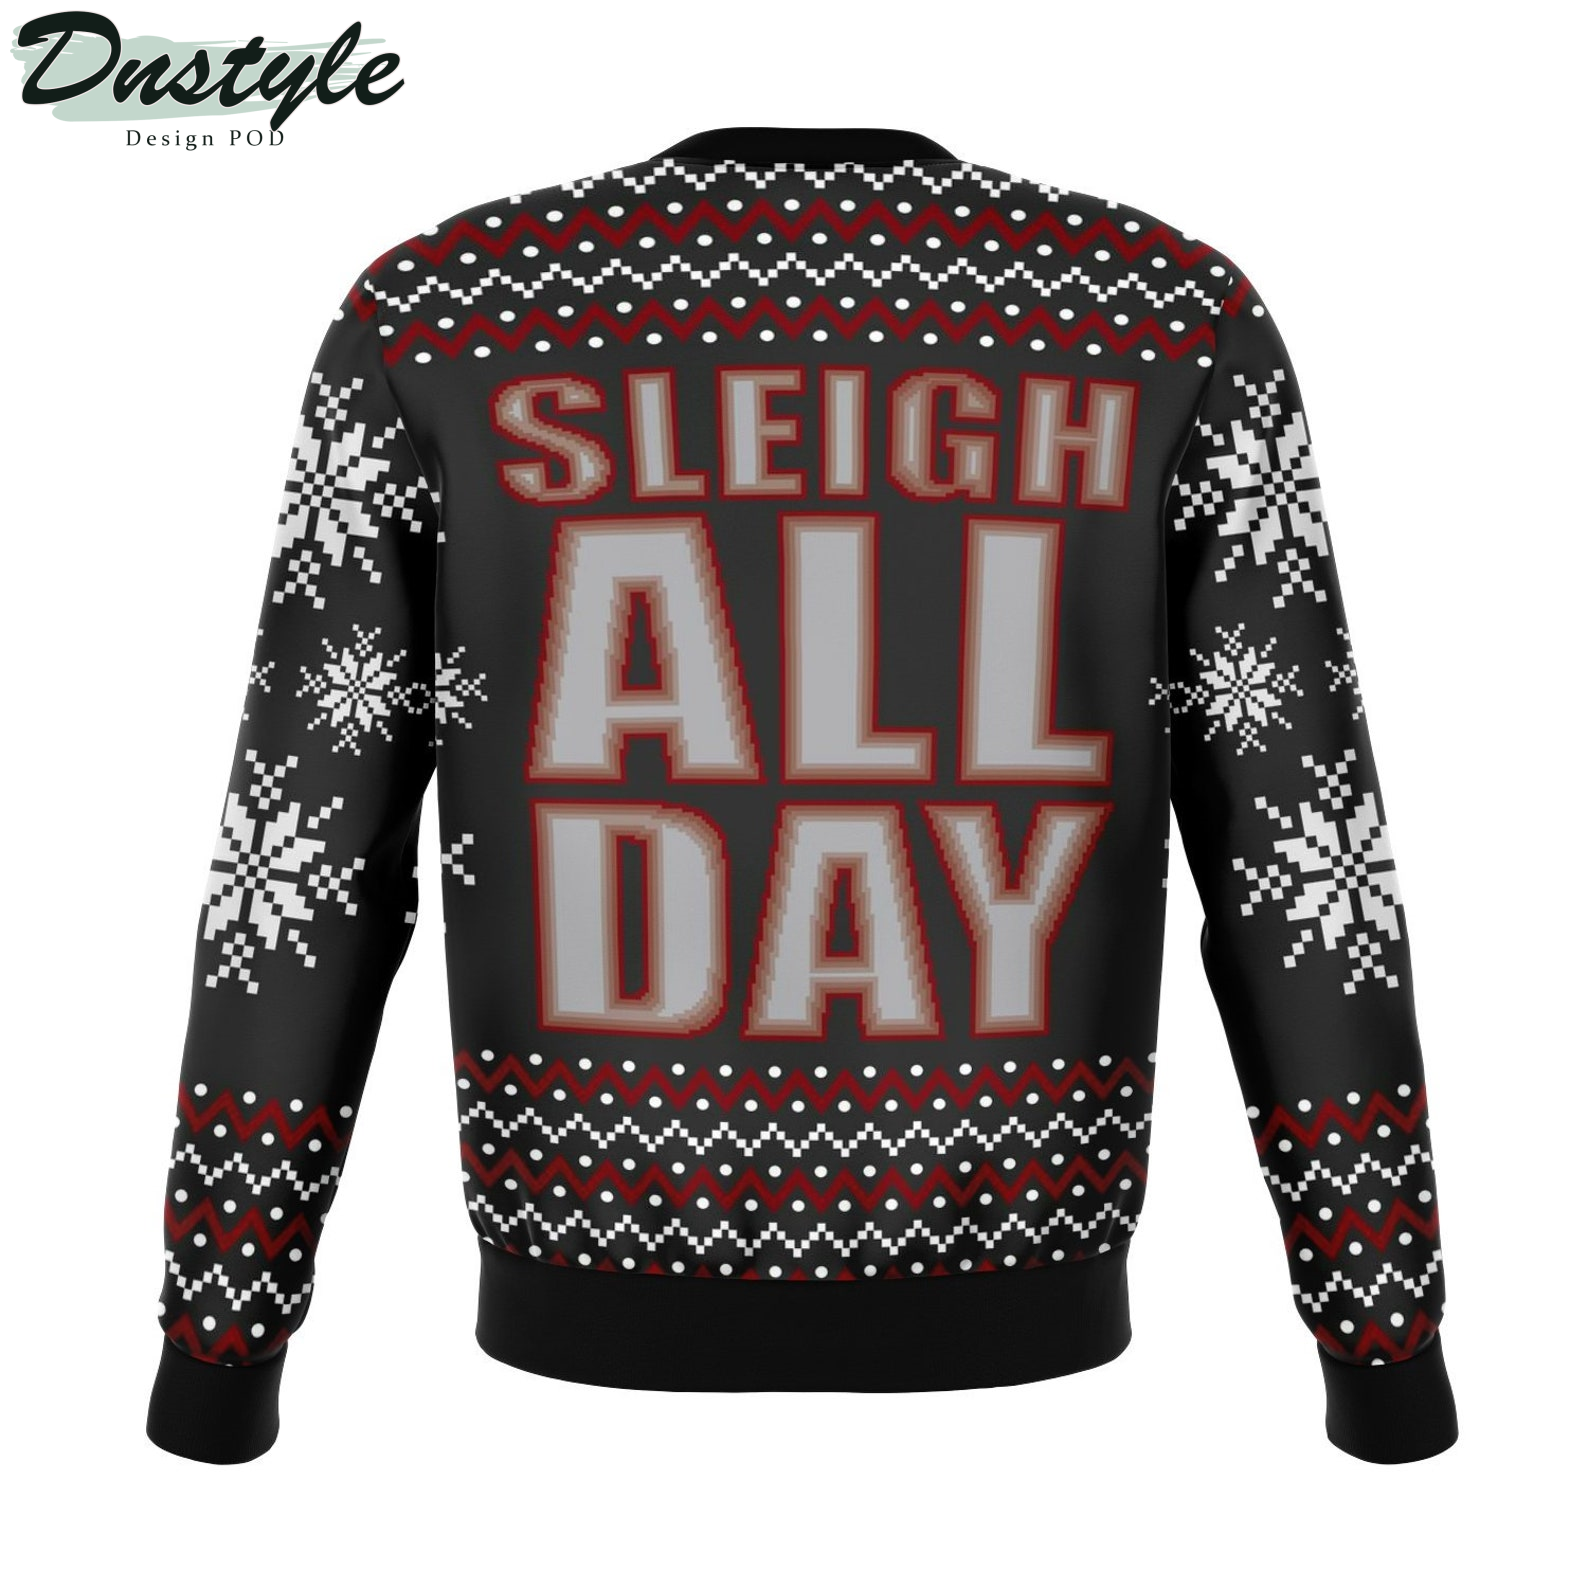 Sleigh All Day 2022 Ugly Christmas Sweater